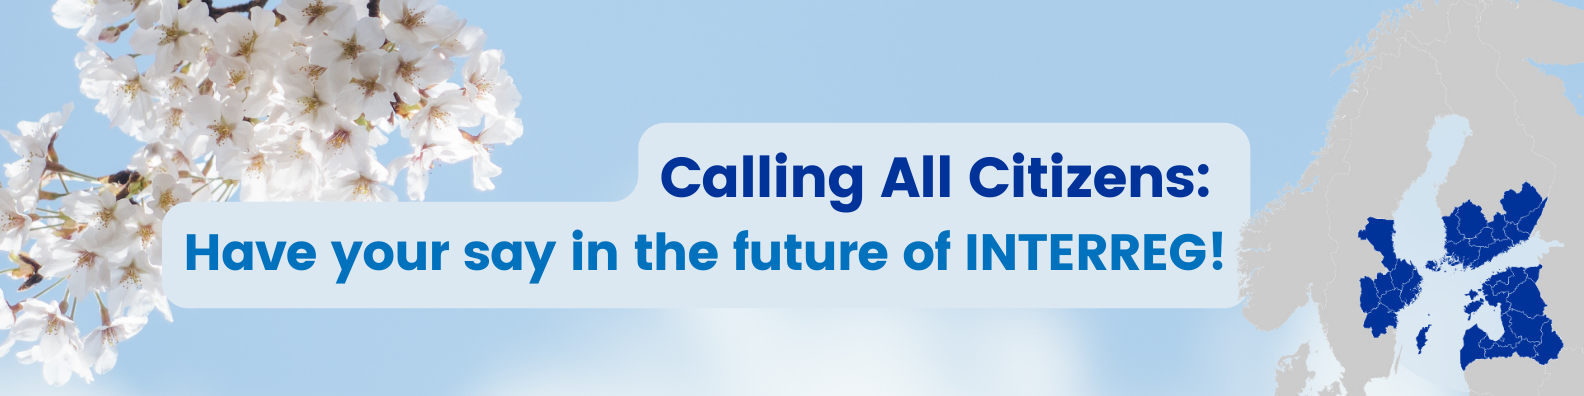 Calling all citizens: Have your say in the future of Interreg